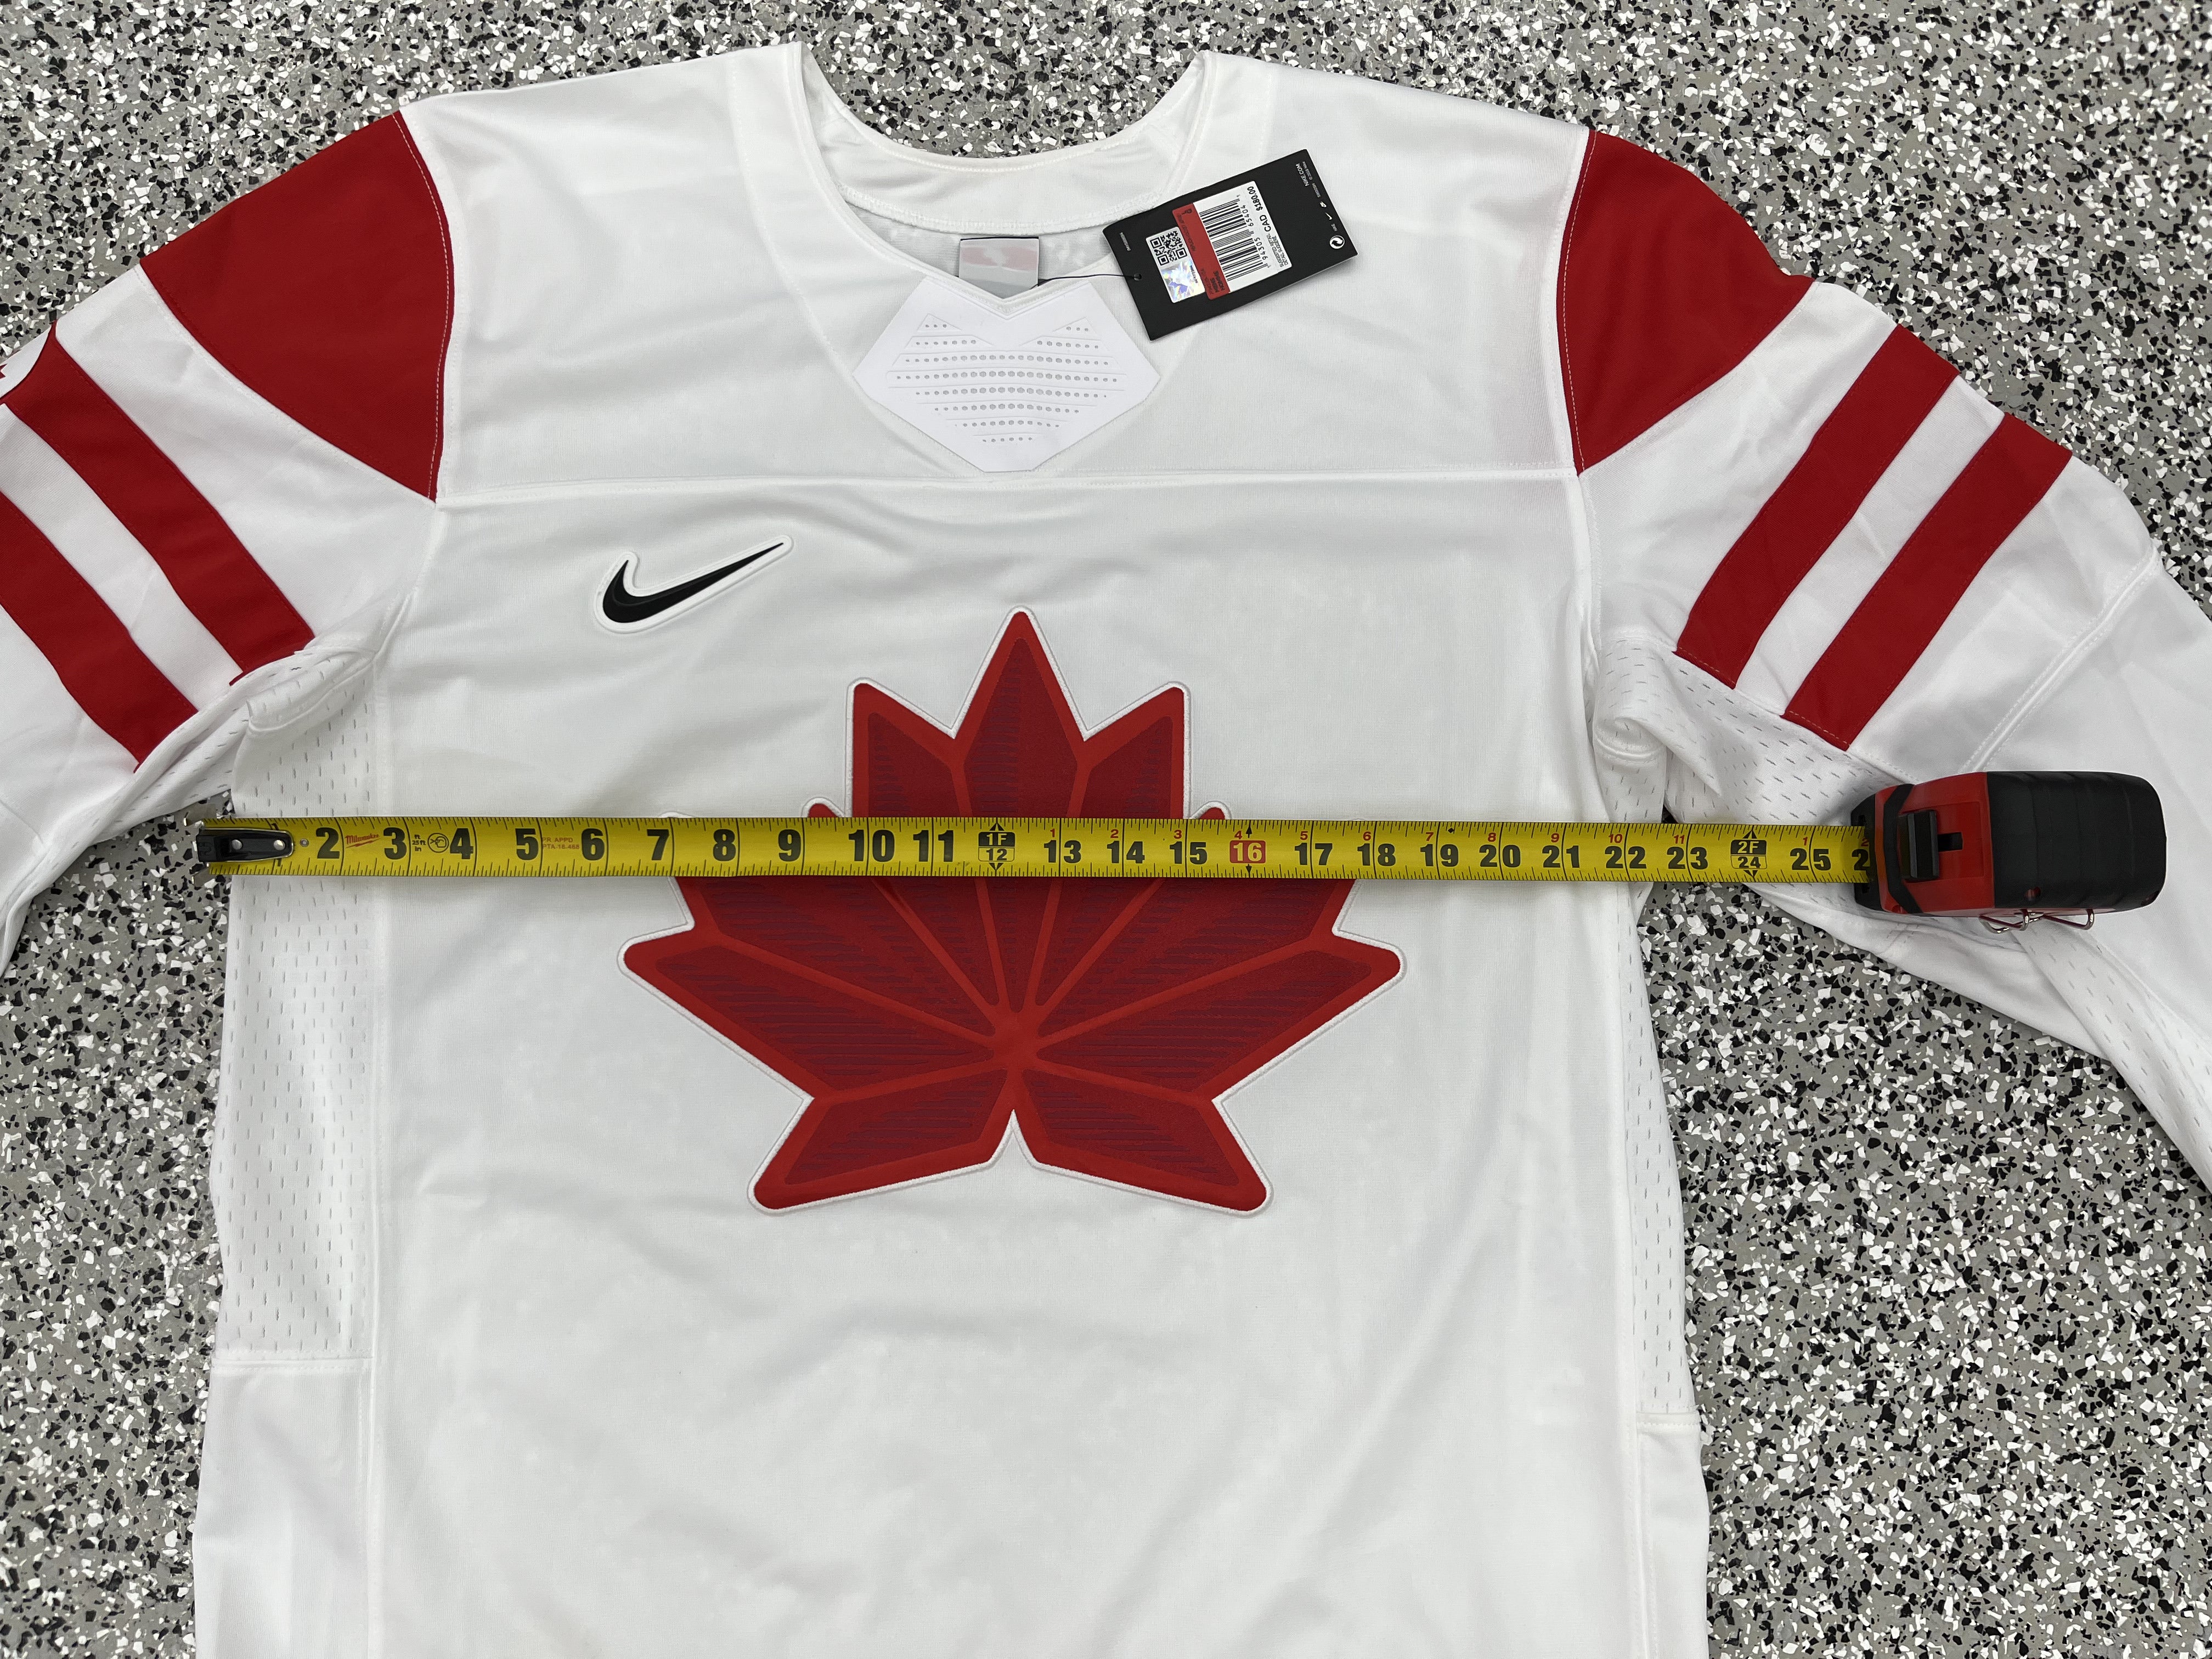 Game-worn Olympic hockey jersey auction now open